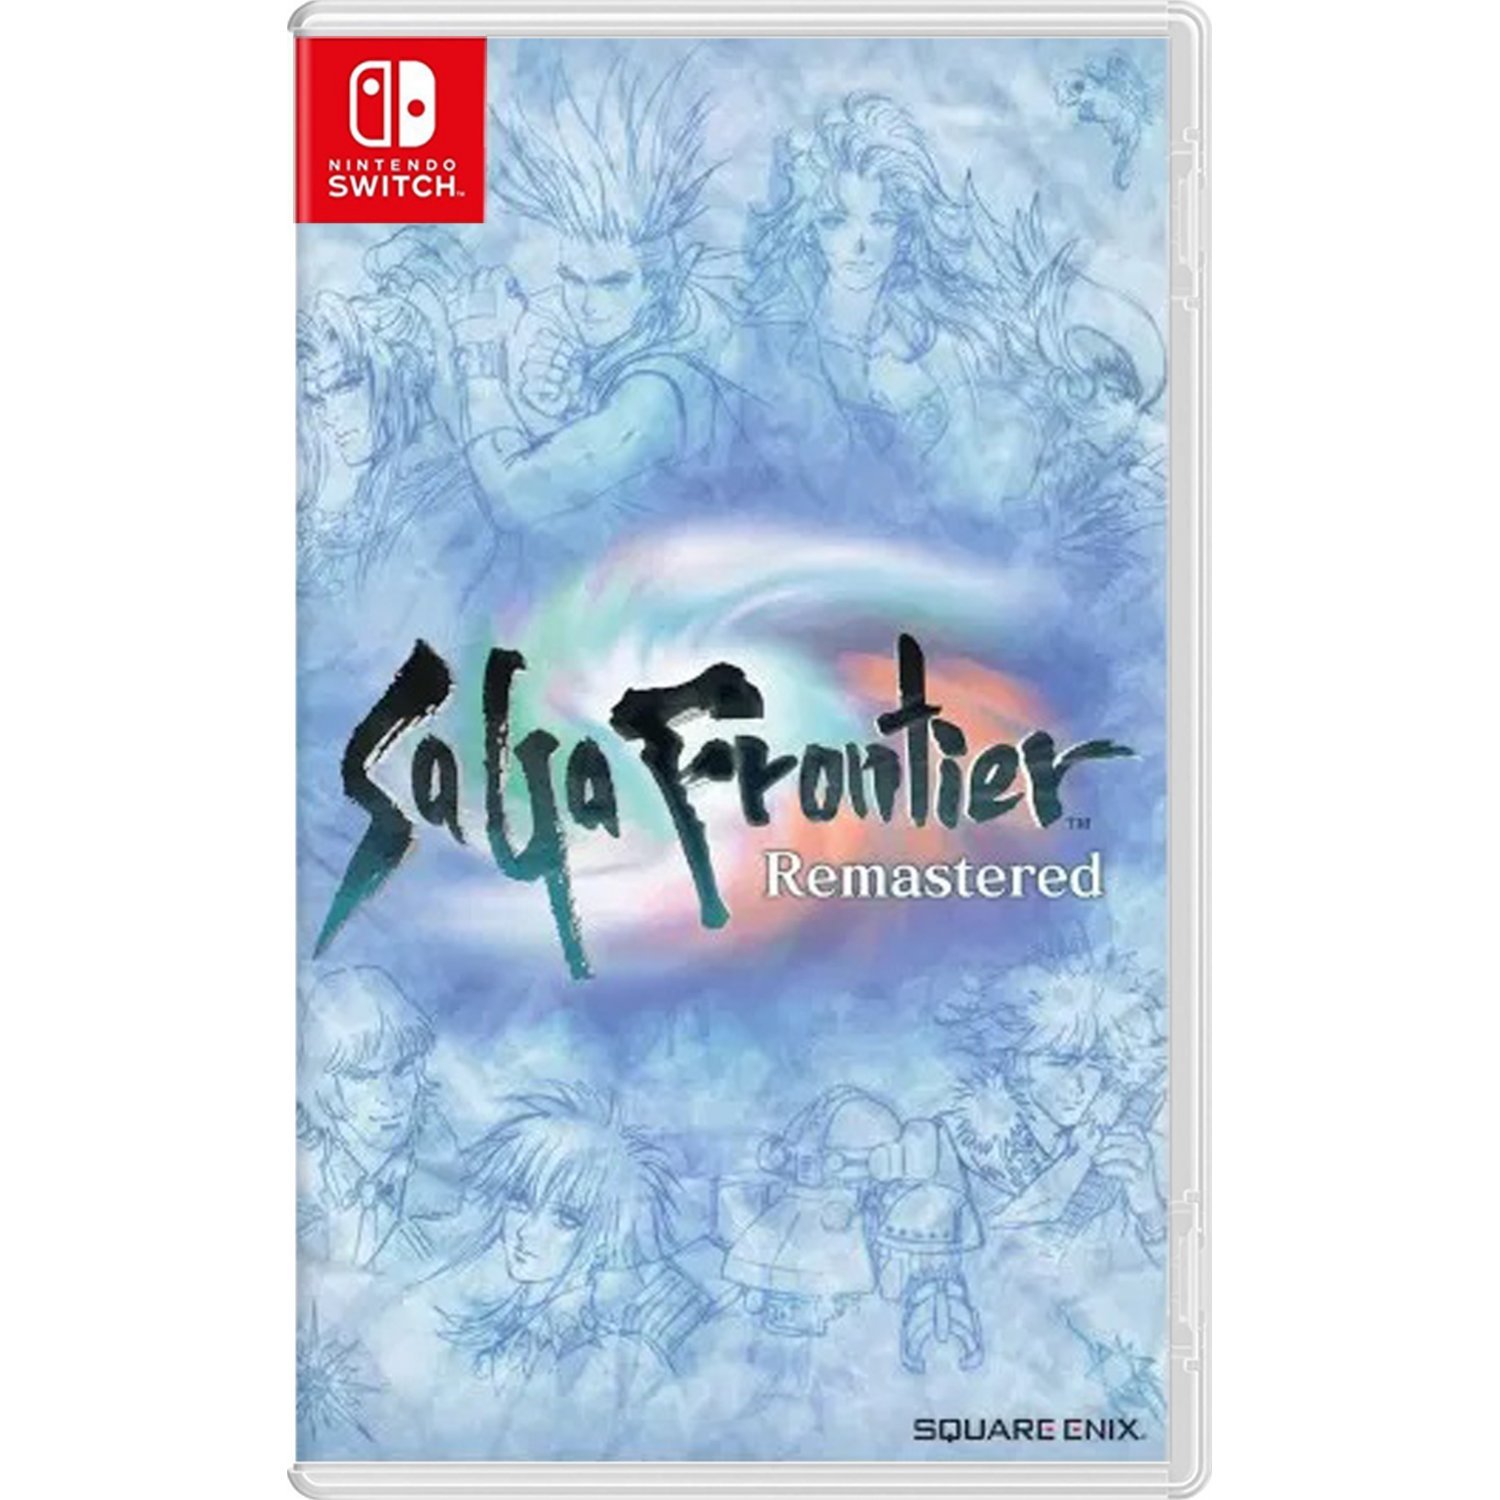 saga frontier remastered red guide